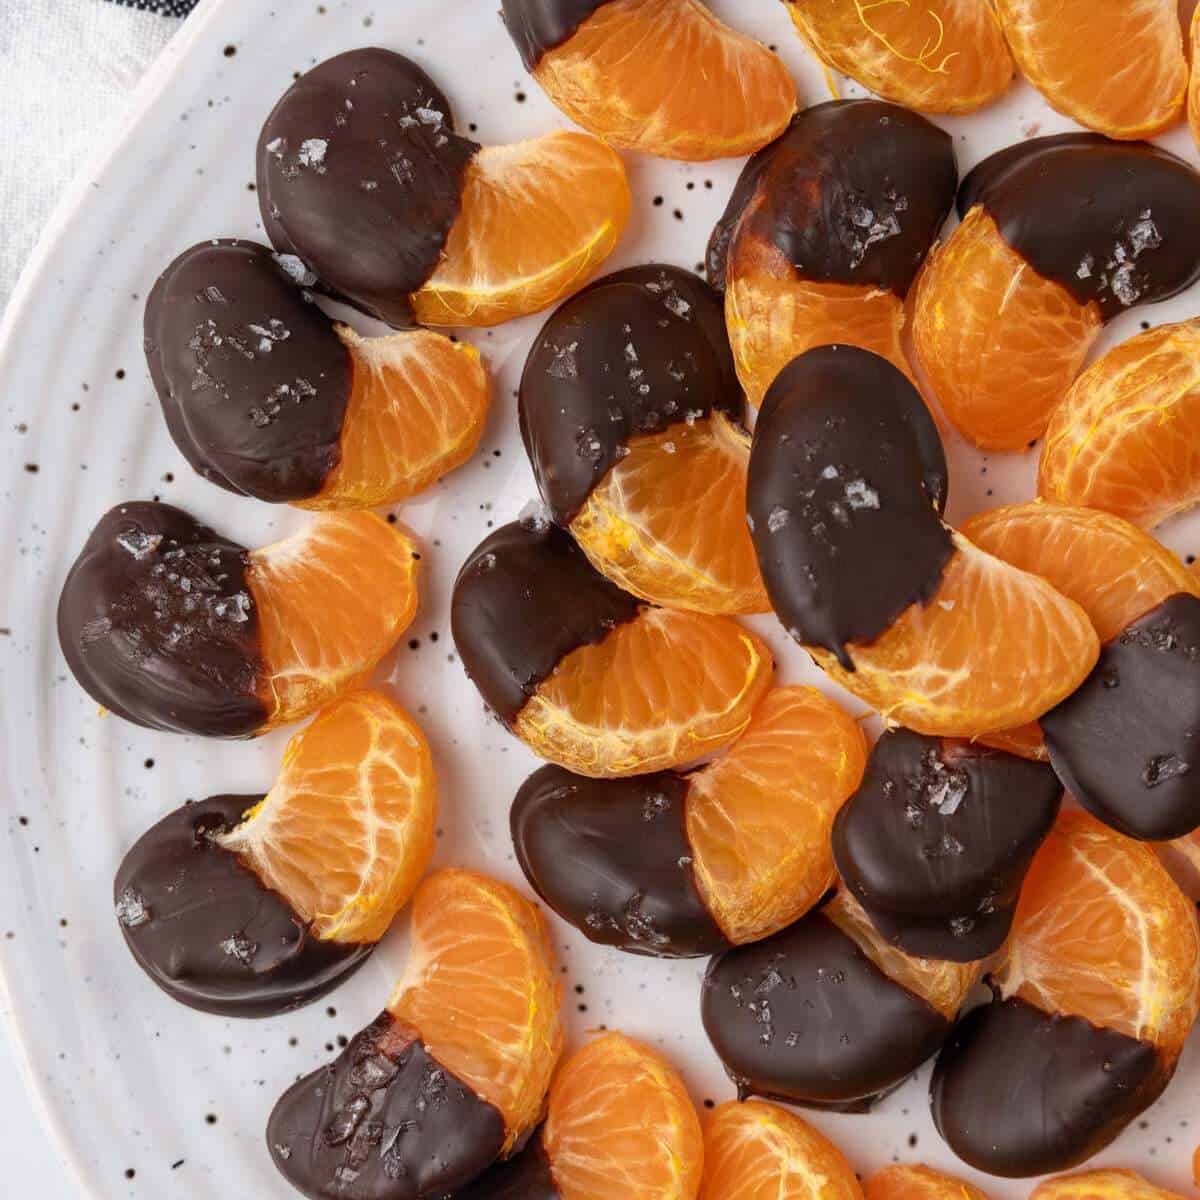 Chocolate covered orange slices dipped in dark chocolate and sprinkled with sea salt, arranged on a white plate.